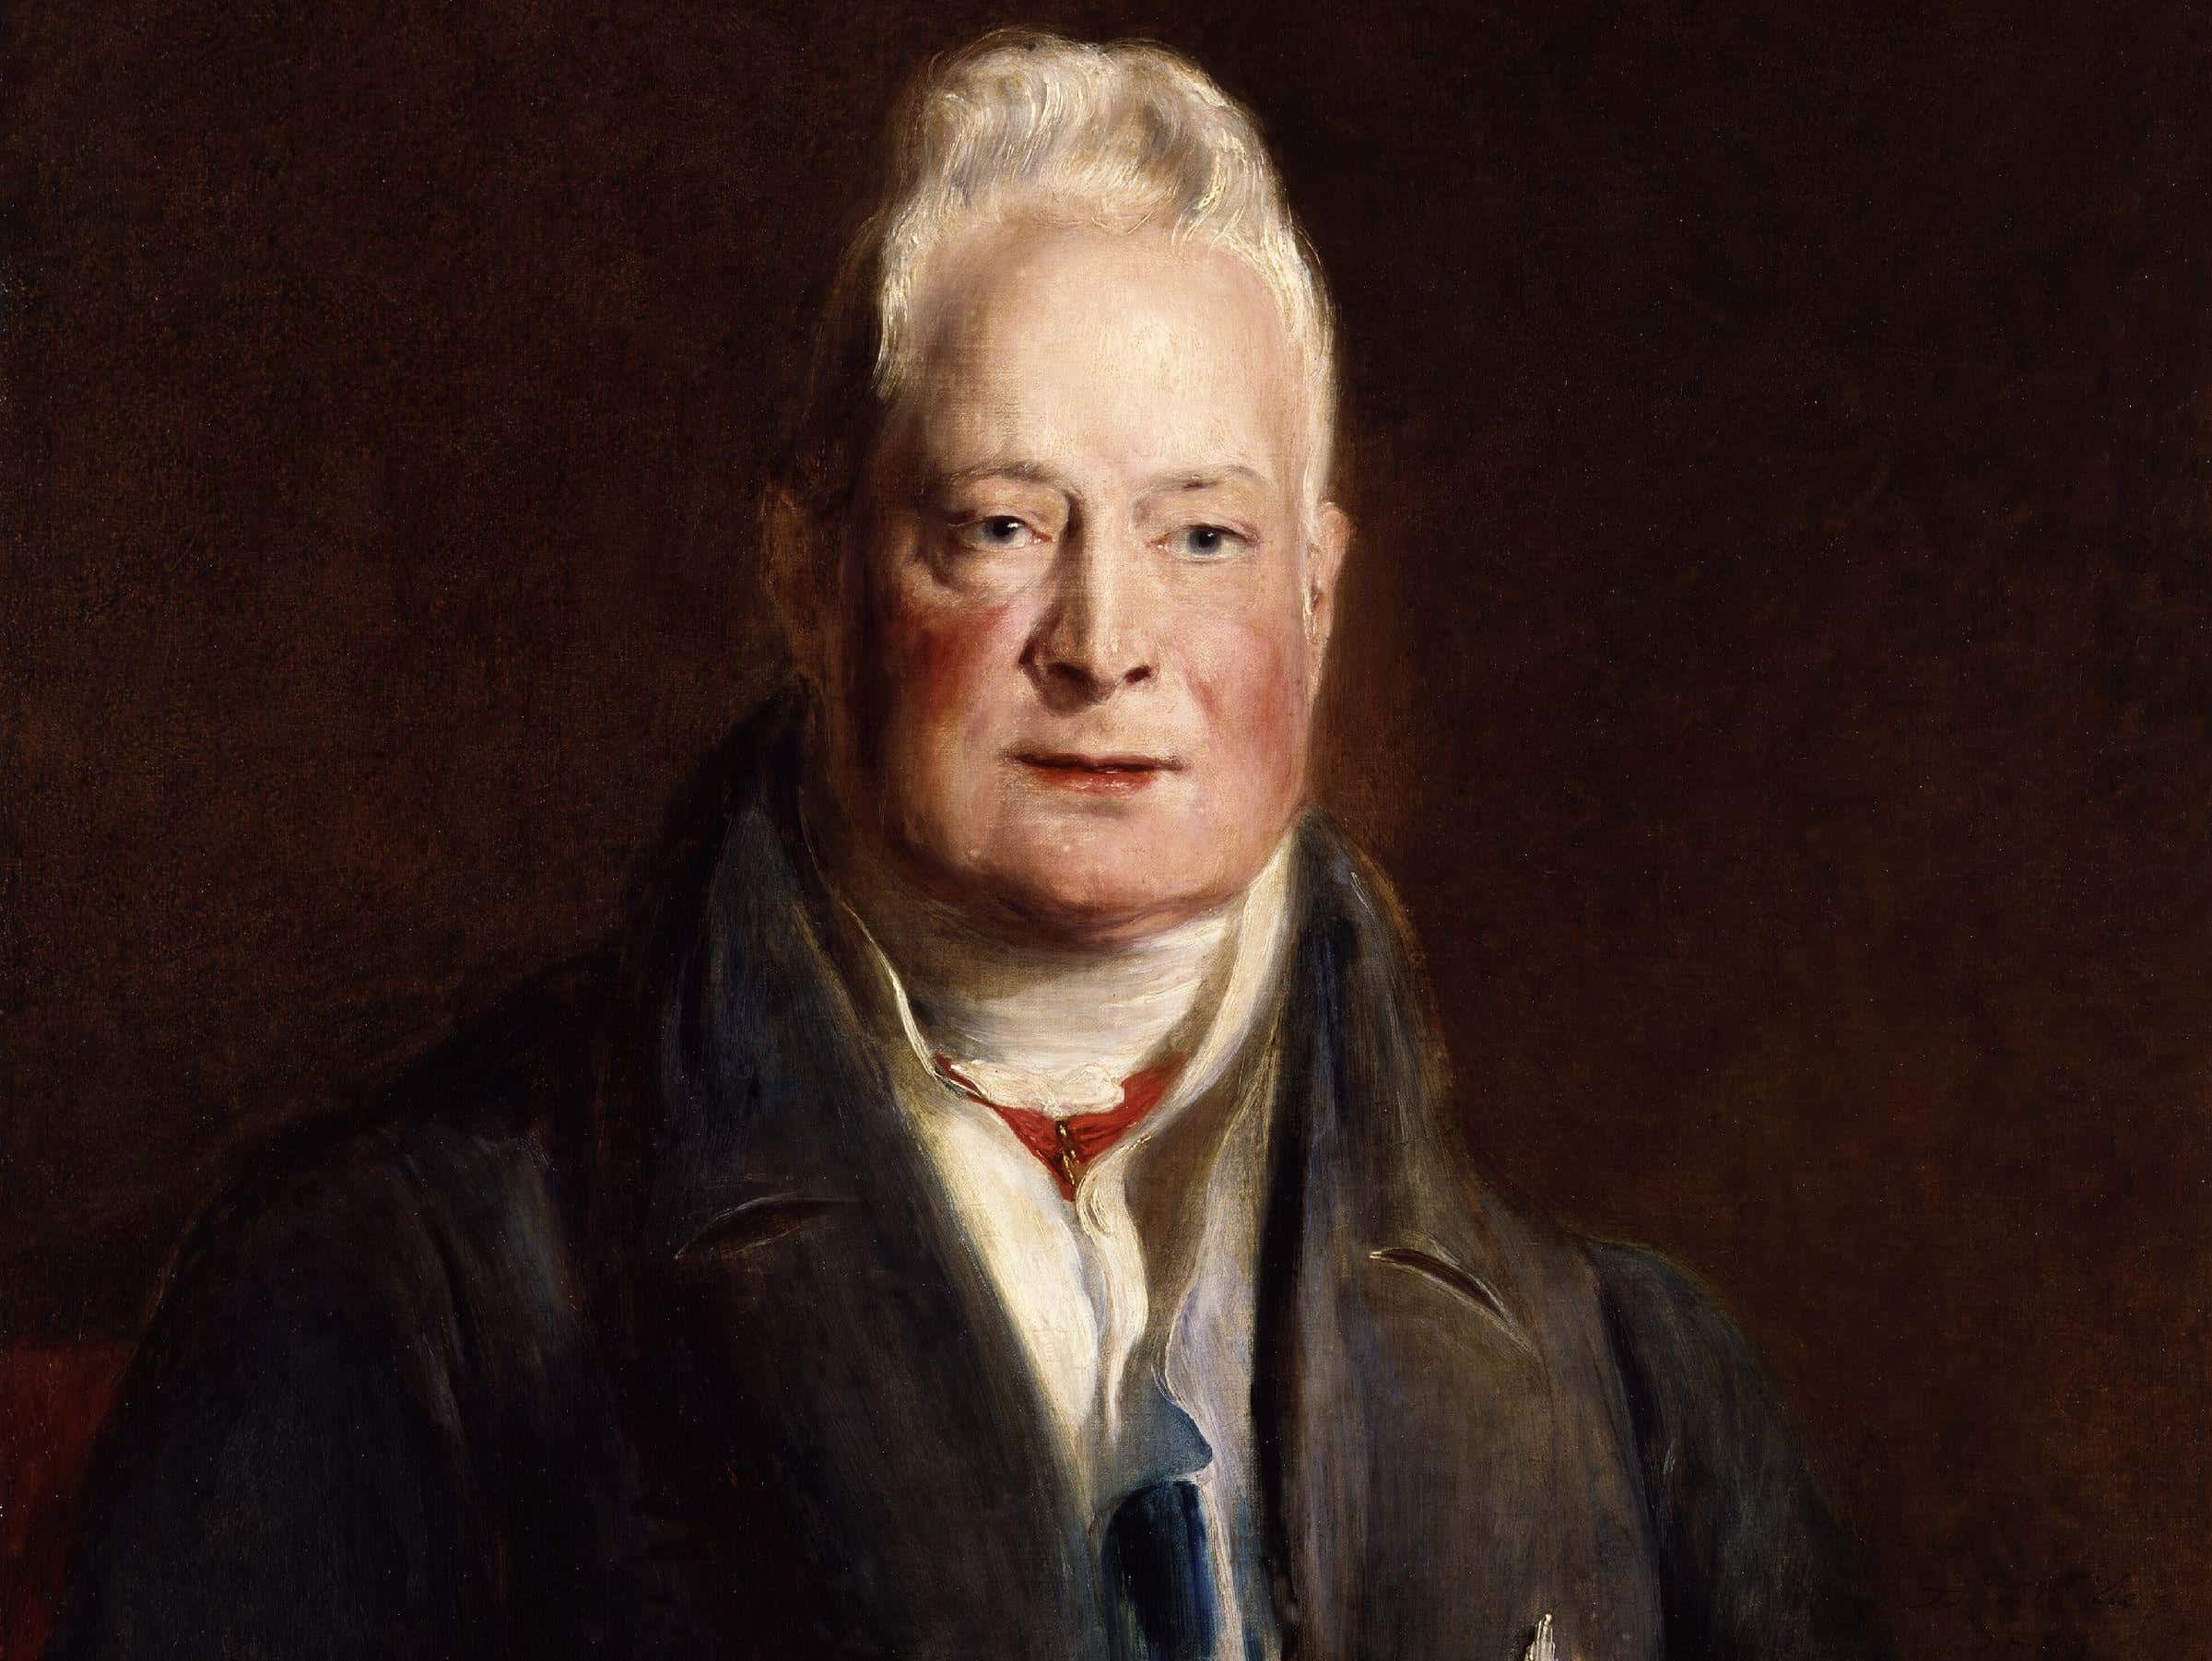 King William IV facts